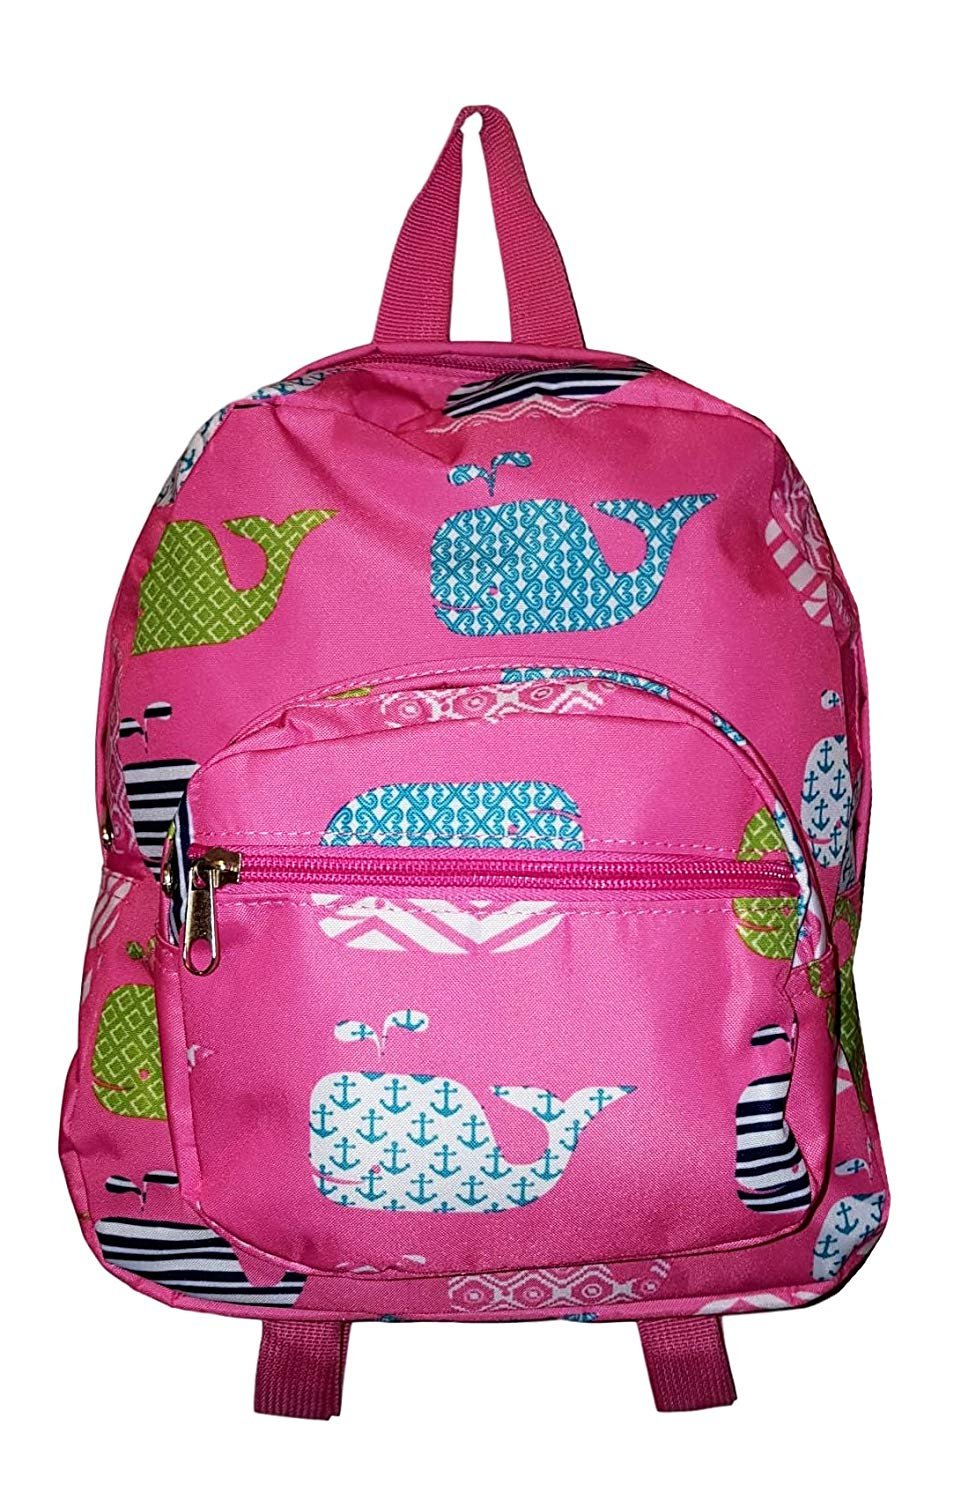 11-inch Mini Backpack Purse, Zipper Front Pockets Teen Child Pink Whale print - image 2 of 3